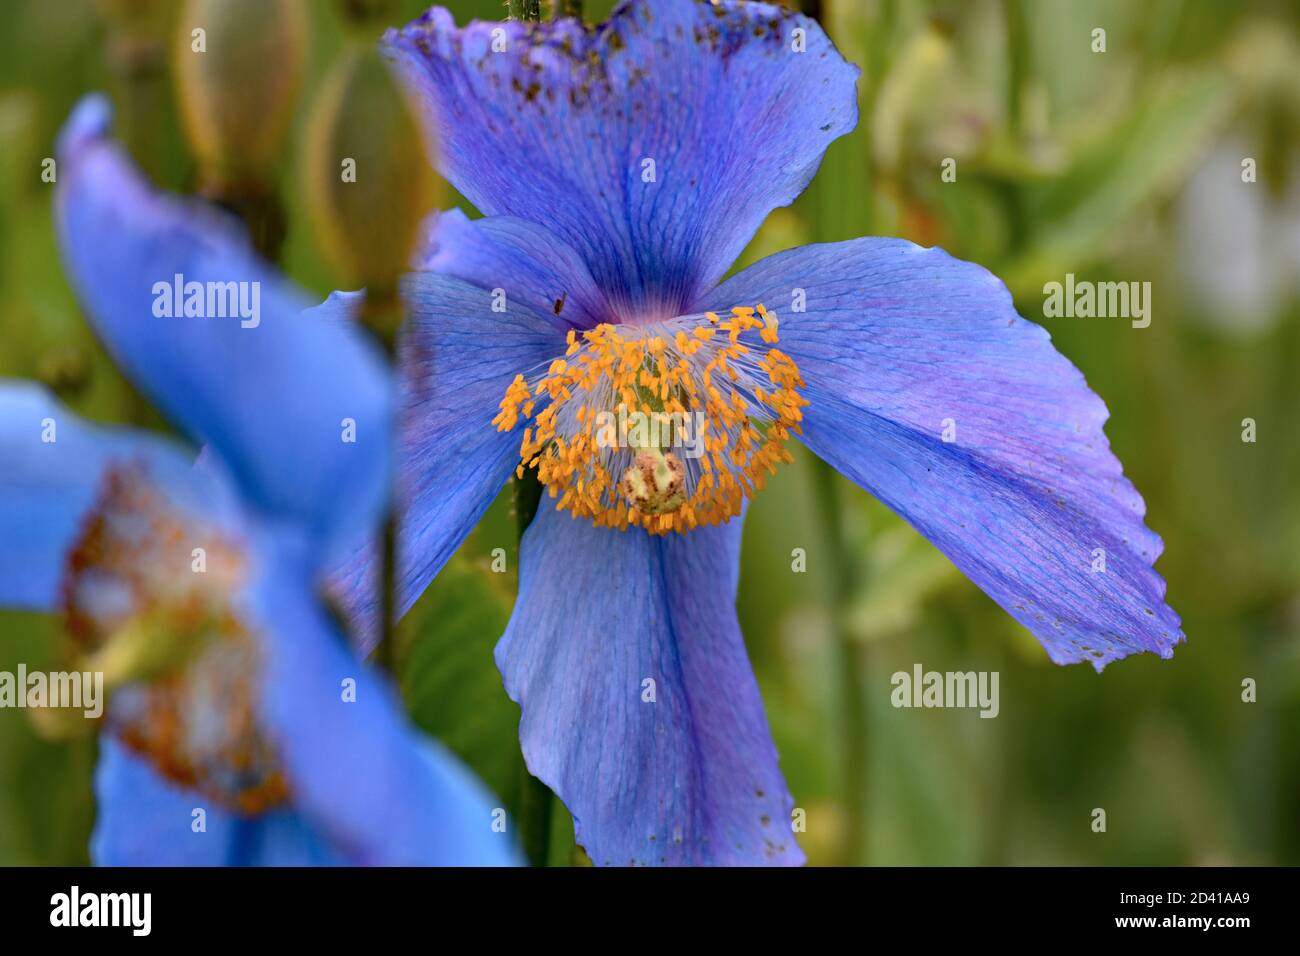 The rare Himalayan blue poppy (Meconopsis betonicifolia) in bloom at the Akureyri Botanical Garden in Northern Iceland. A blurred green background. Stock Photo